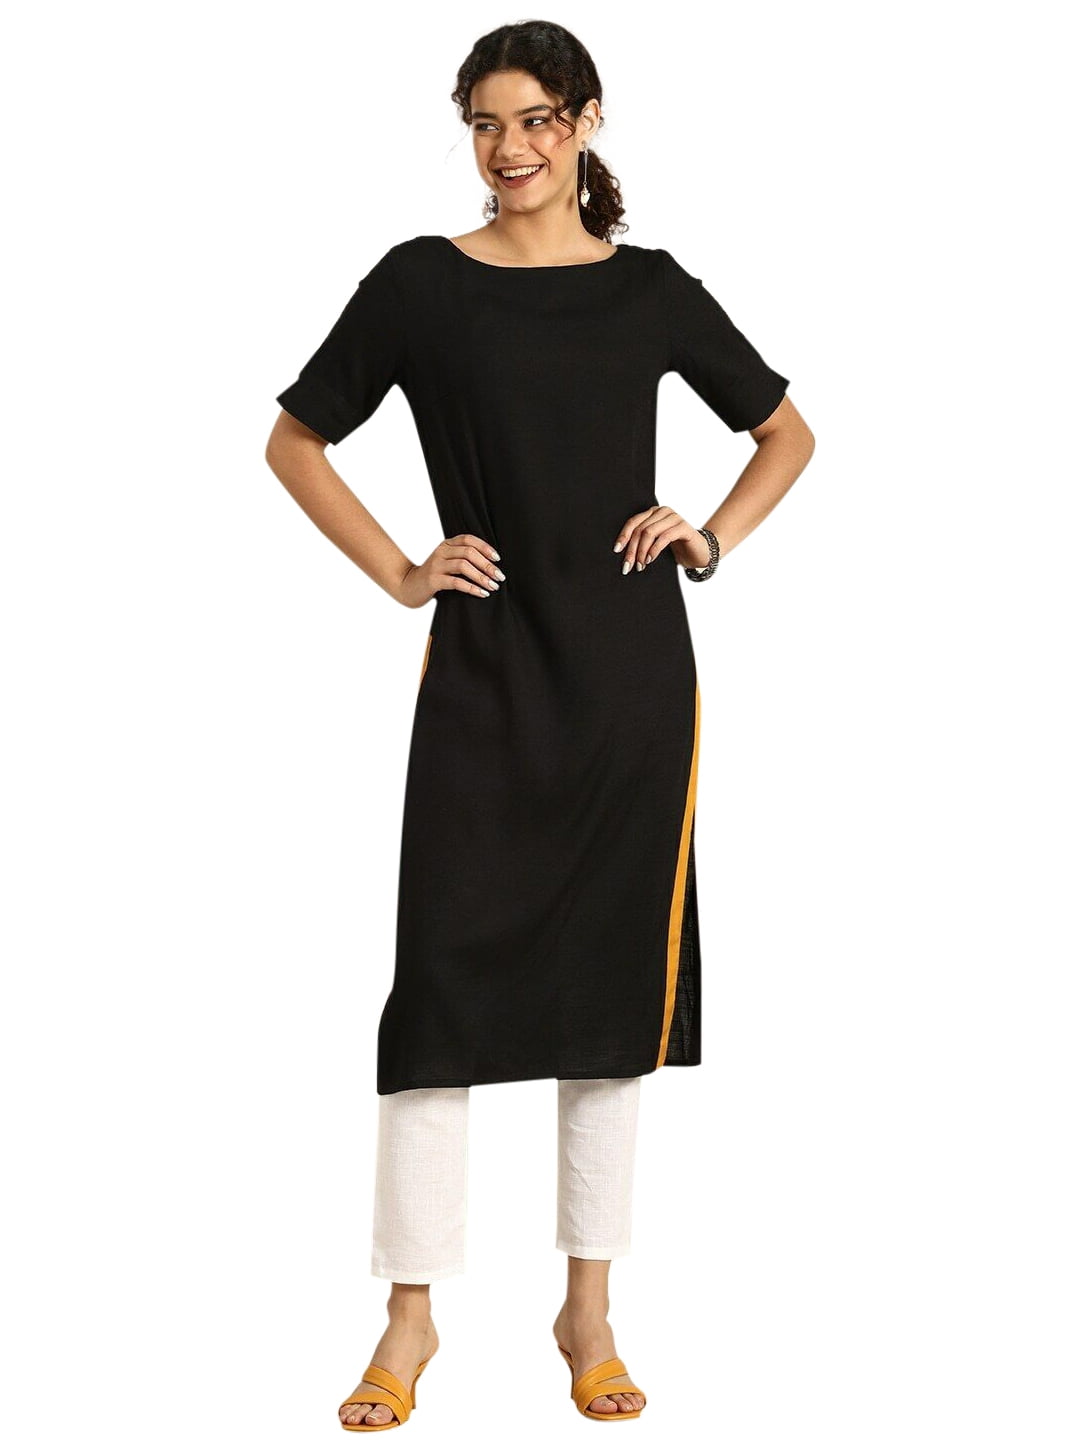 KALINI Olive Green & Black Striped Boat Neck Kurti Price in India, Full  Specifications & Offers | DTashion.com